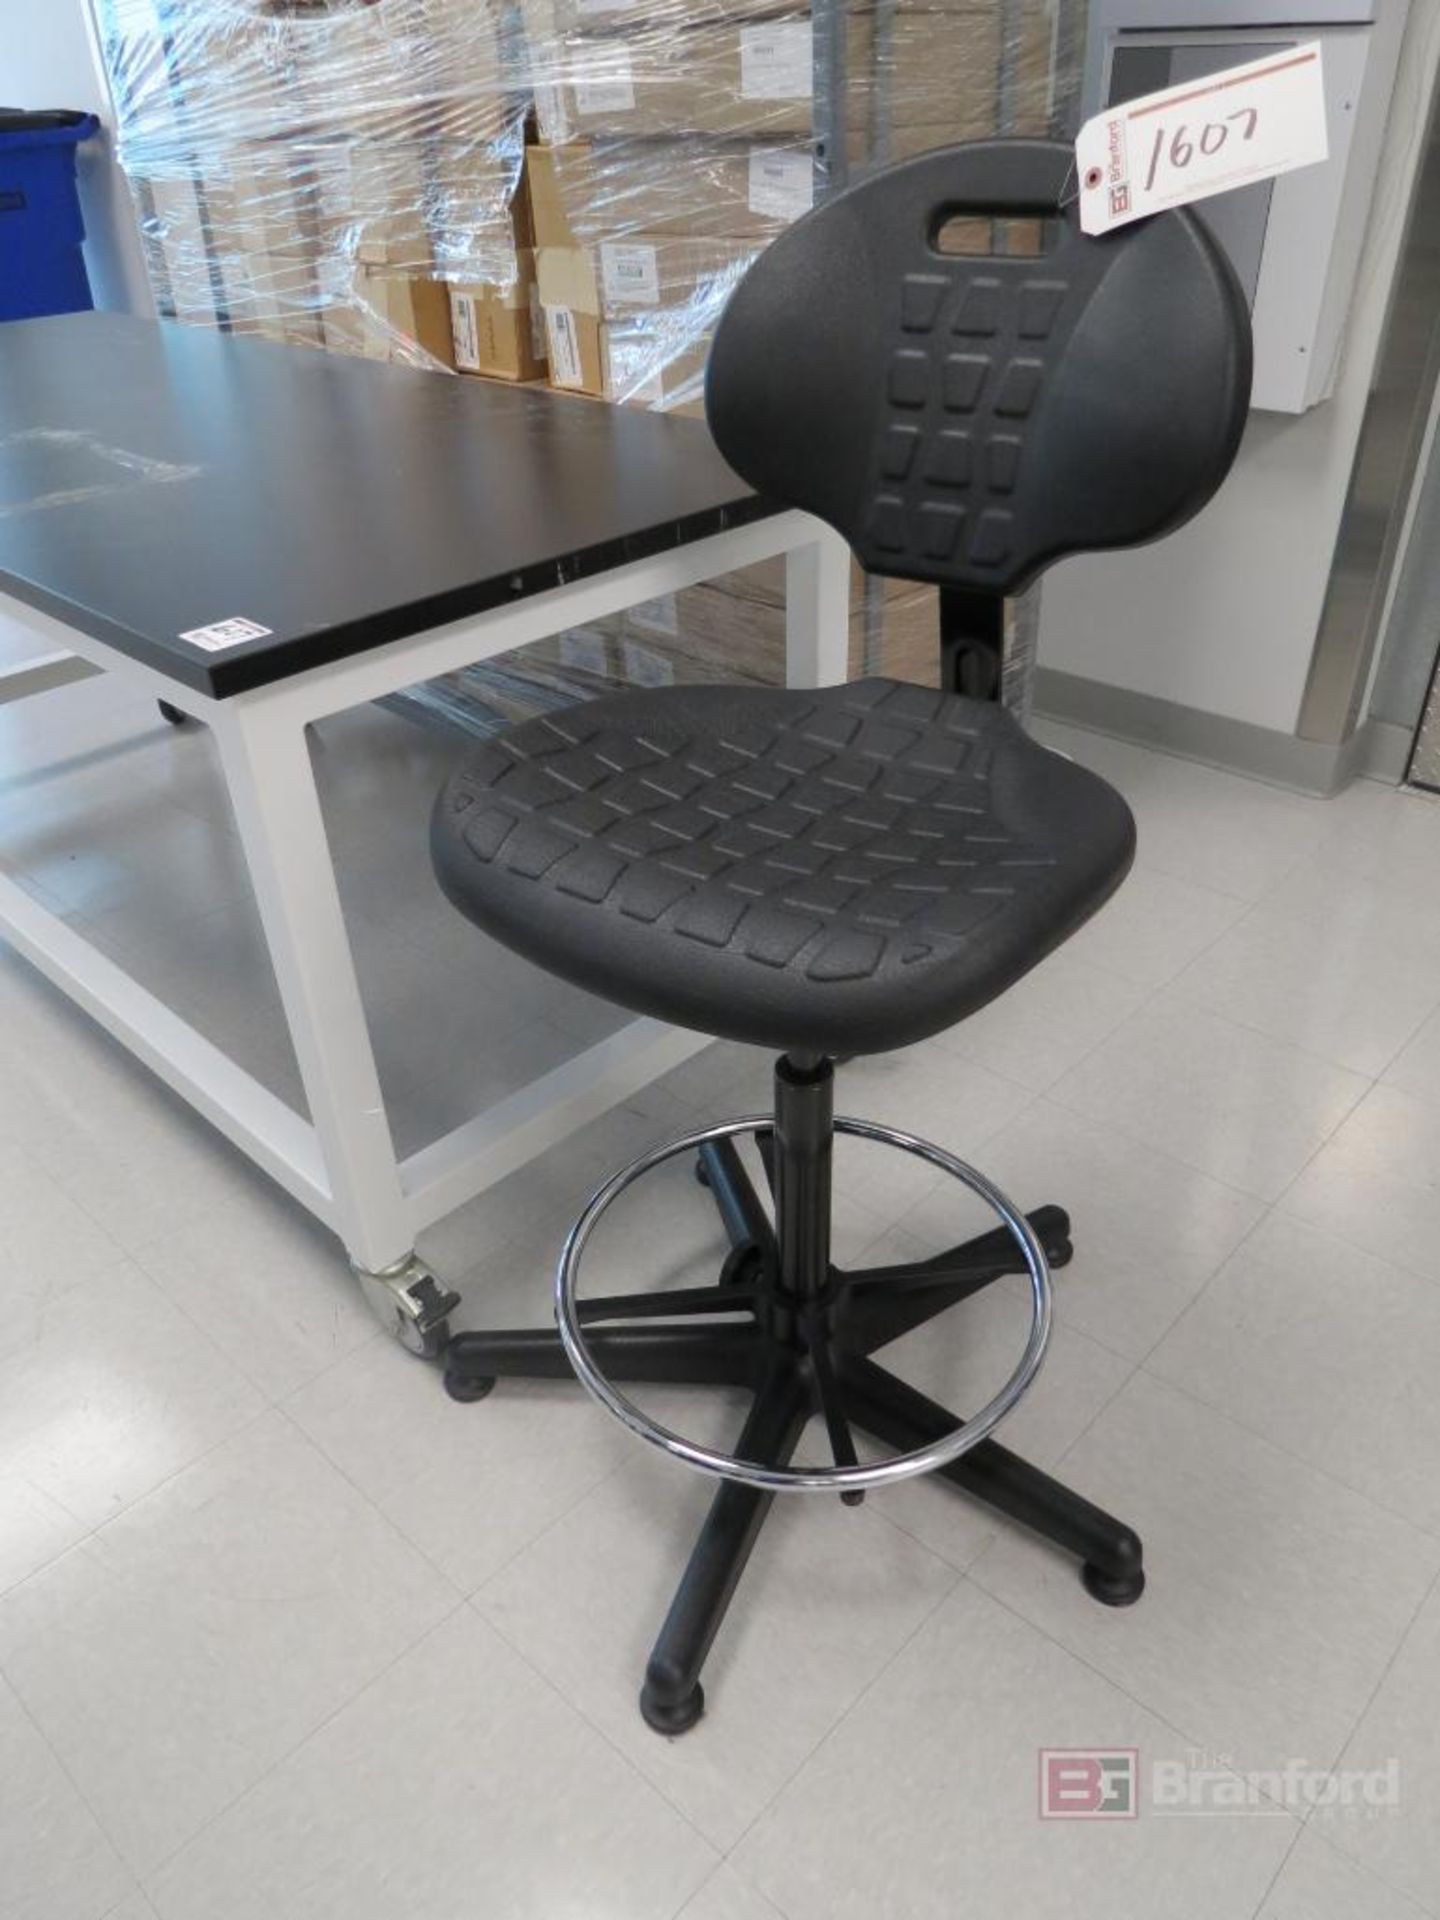 Portable Lab Bench & Uline H-1375 Stool - Image 3 of 4